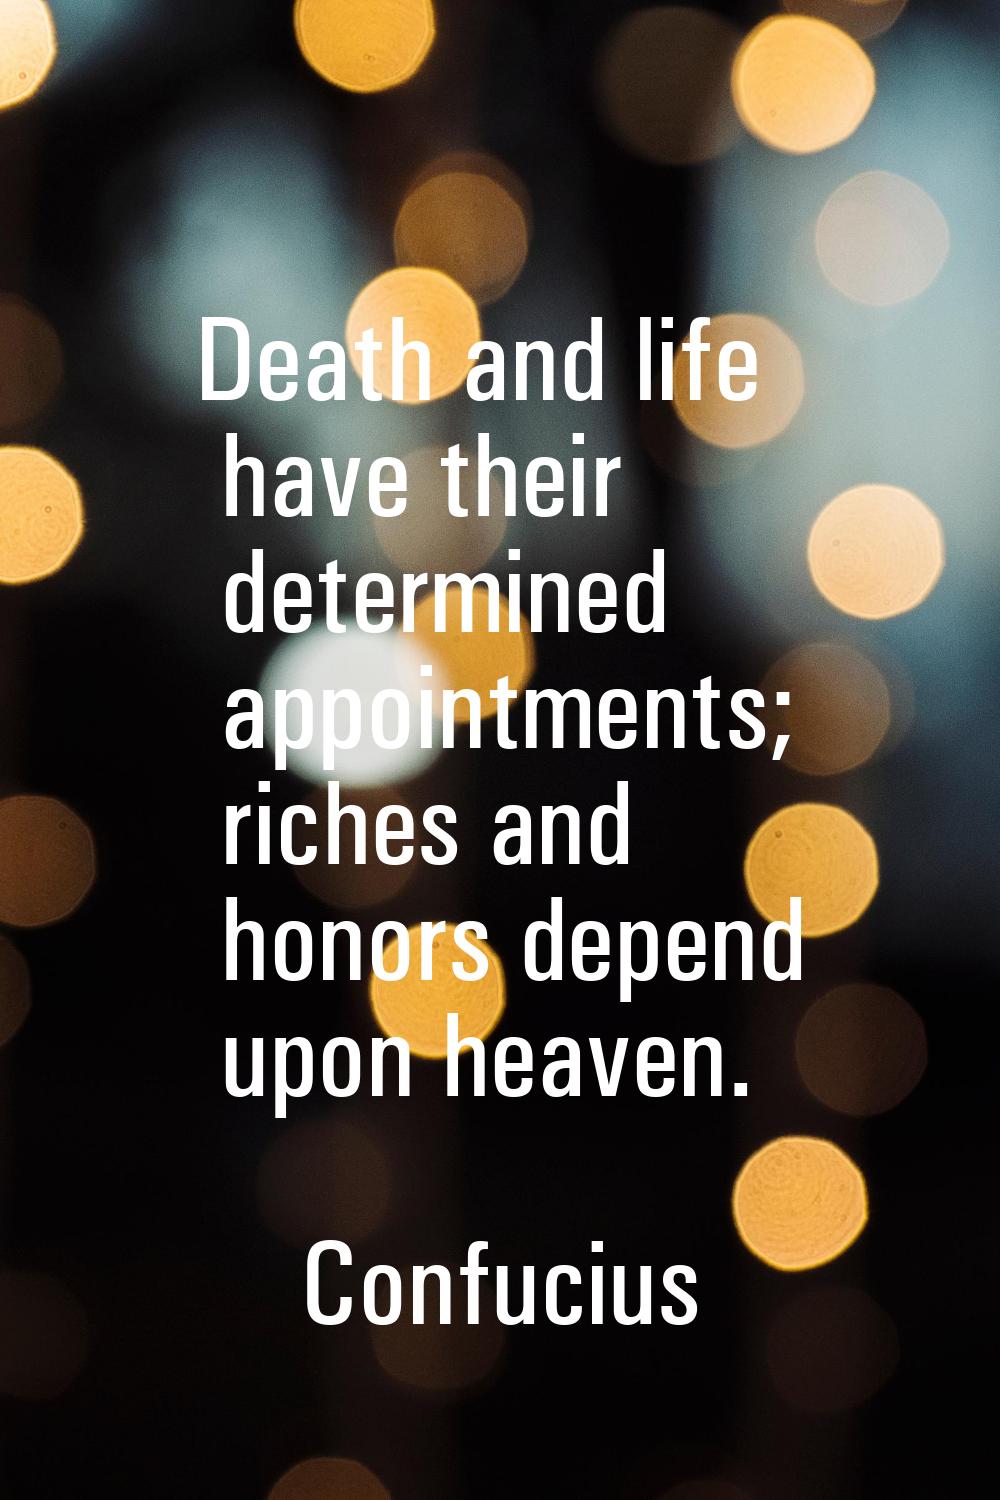 Death and life have their determined appointments; riches and honors depend upon heaven.